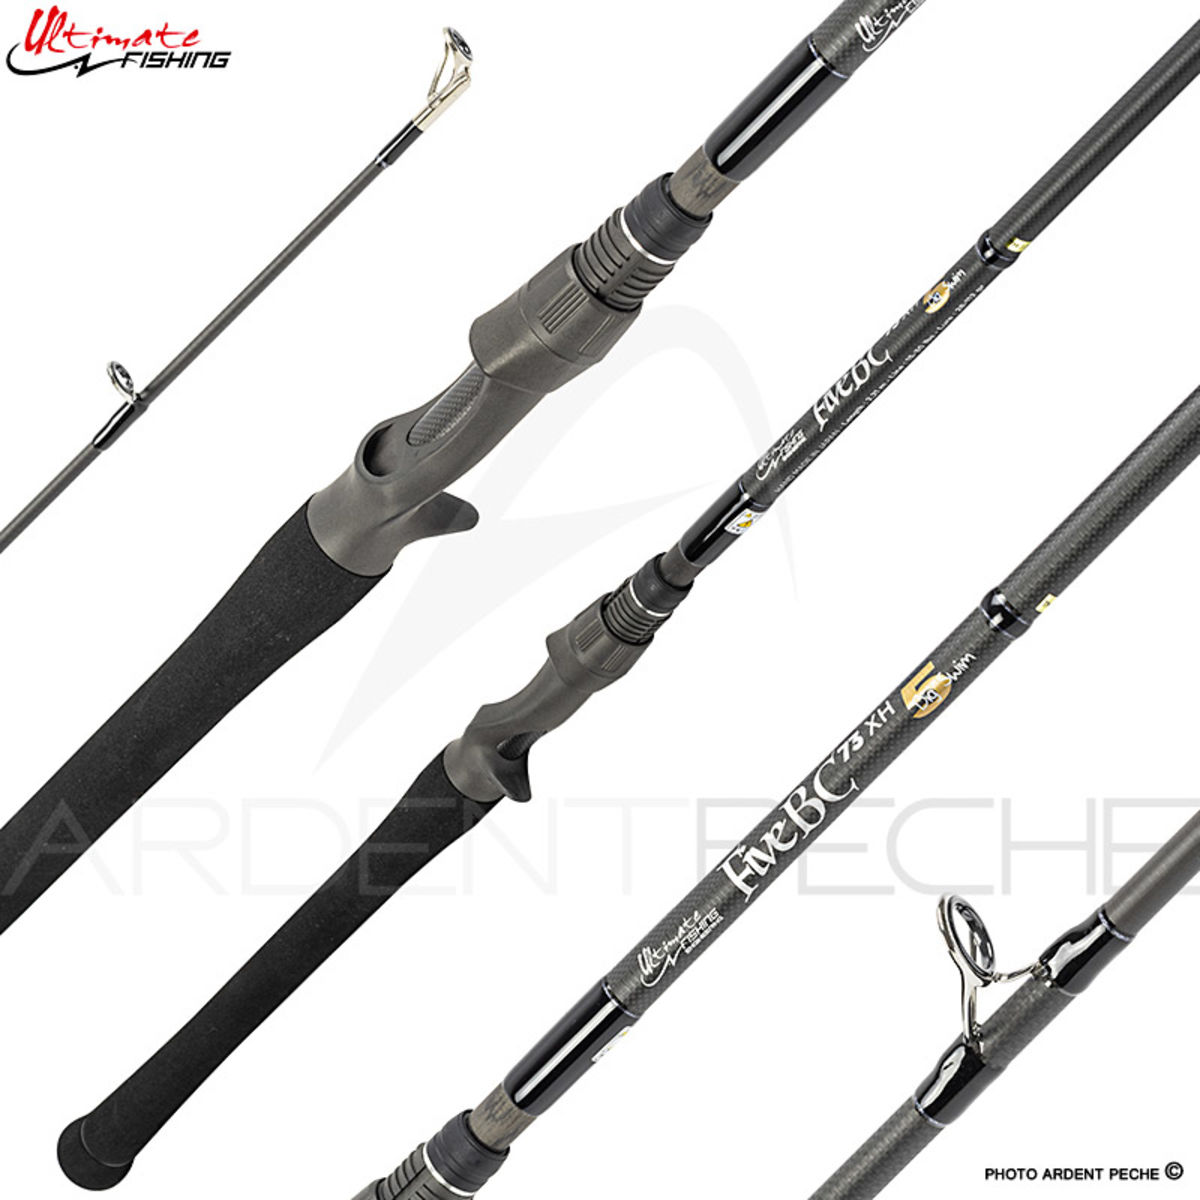 https://www.ardent-peche.com/Image/73092/1200x1200/canne-casting-ultimate-fishing-five-bc-73-xh.jpg